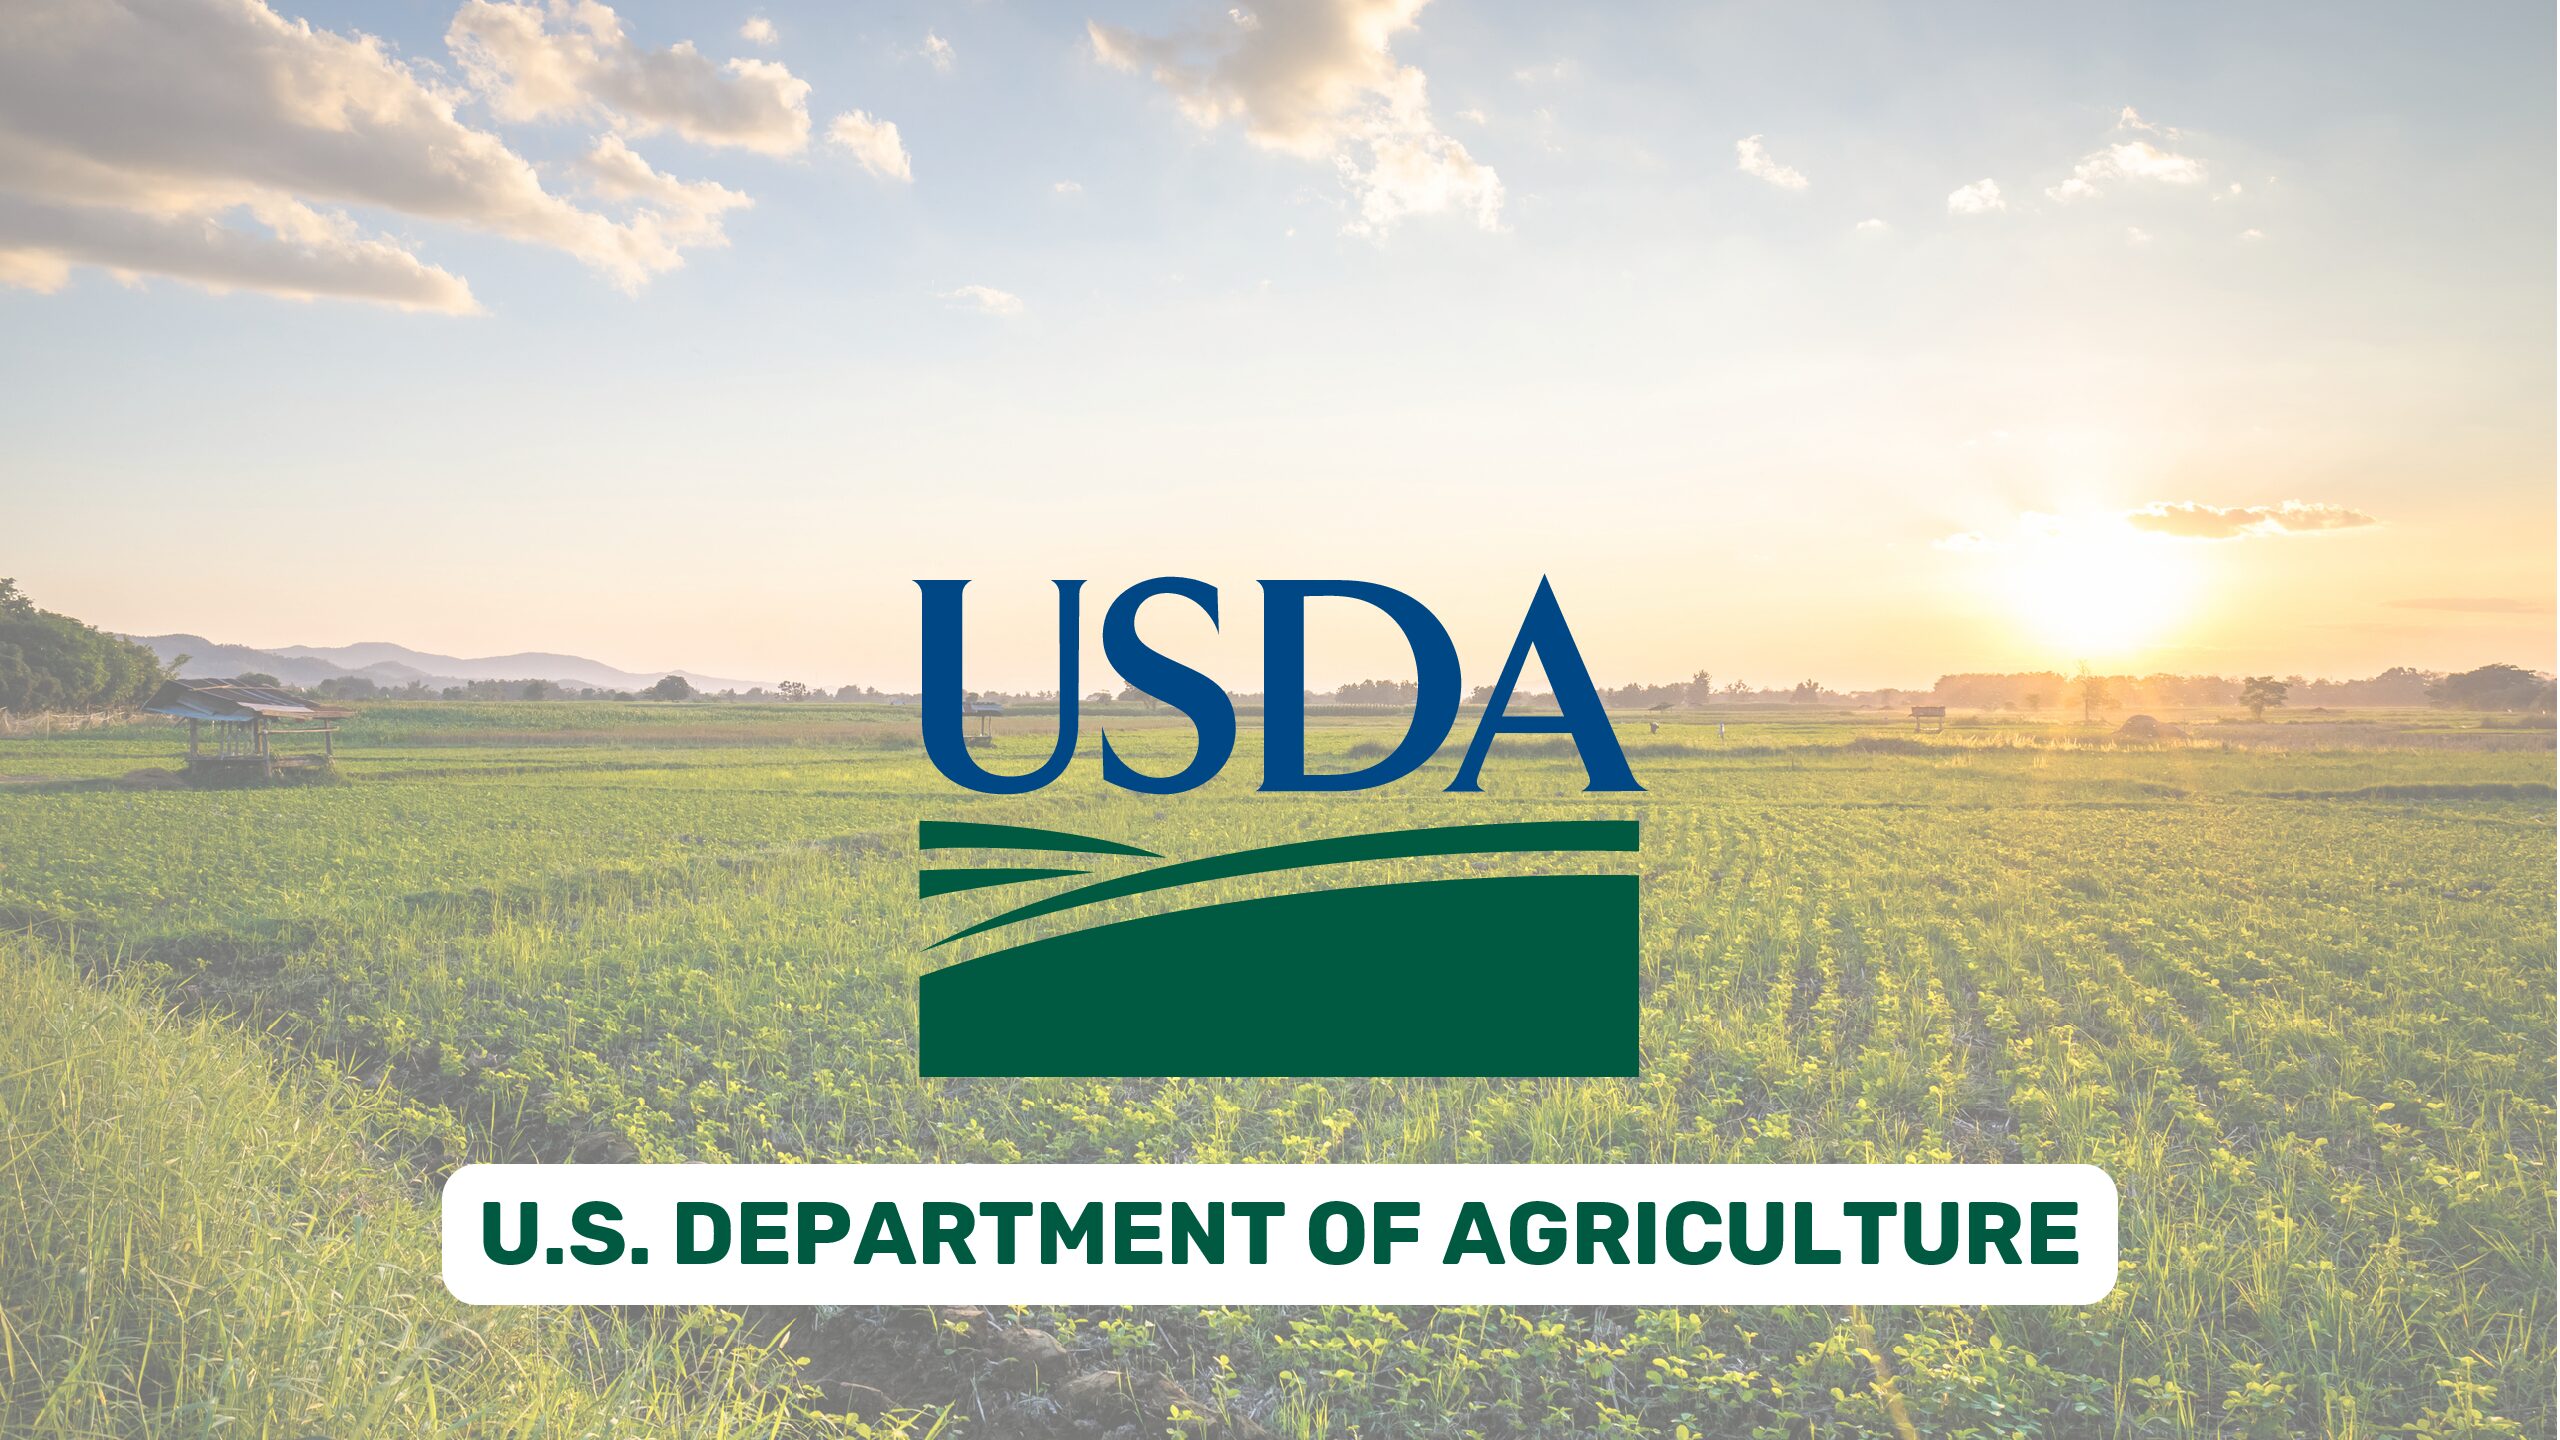 USDA Offers Disaster Recovery Assistance to Agricultural Producers in California Impacted by Recent Flooding